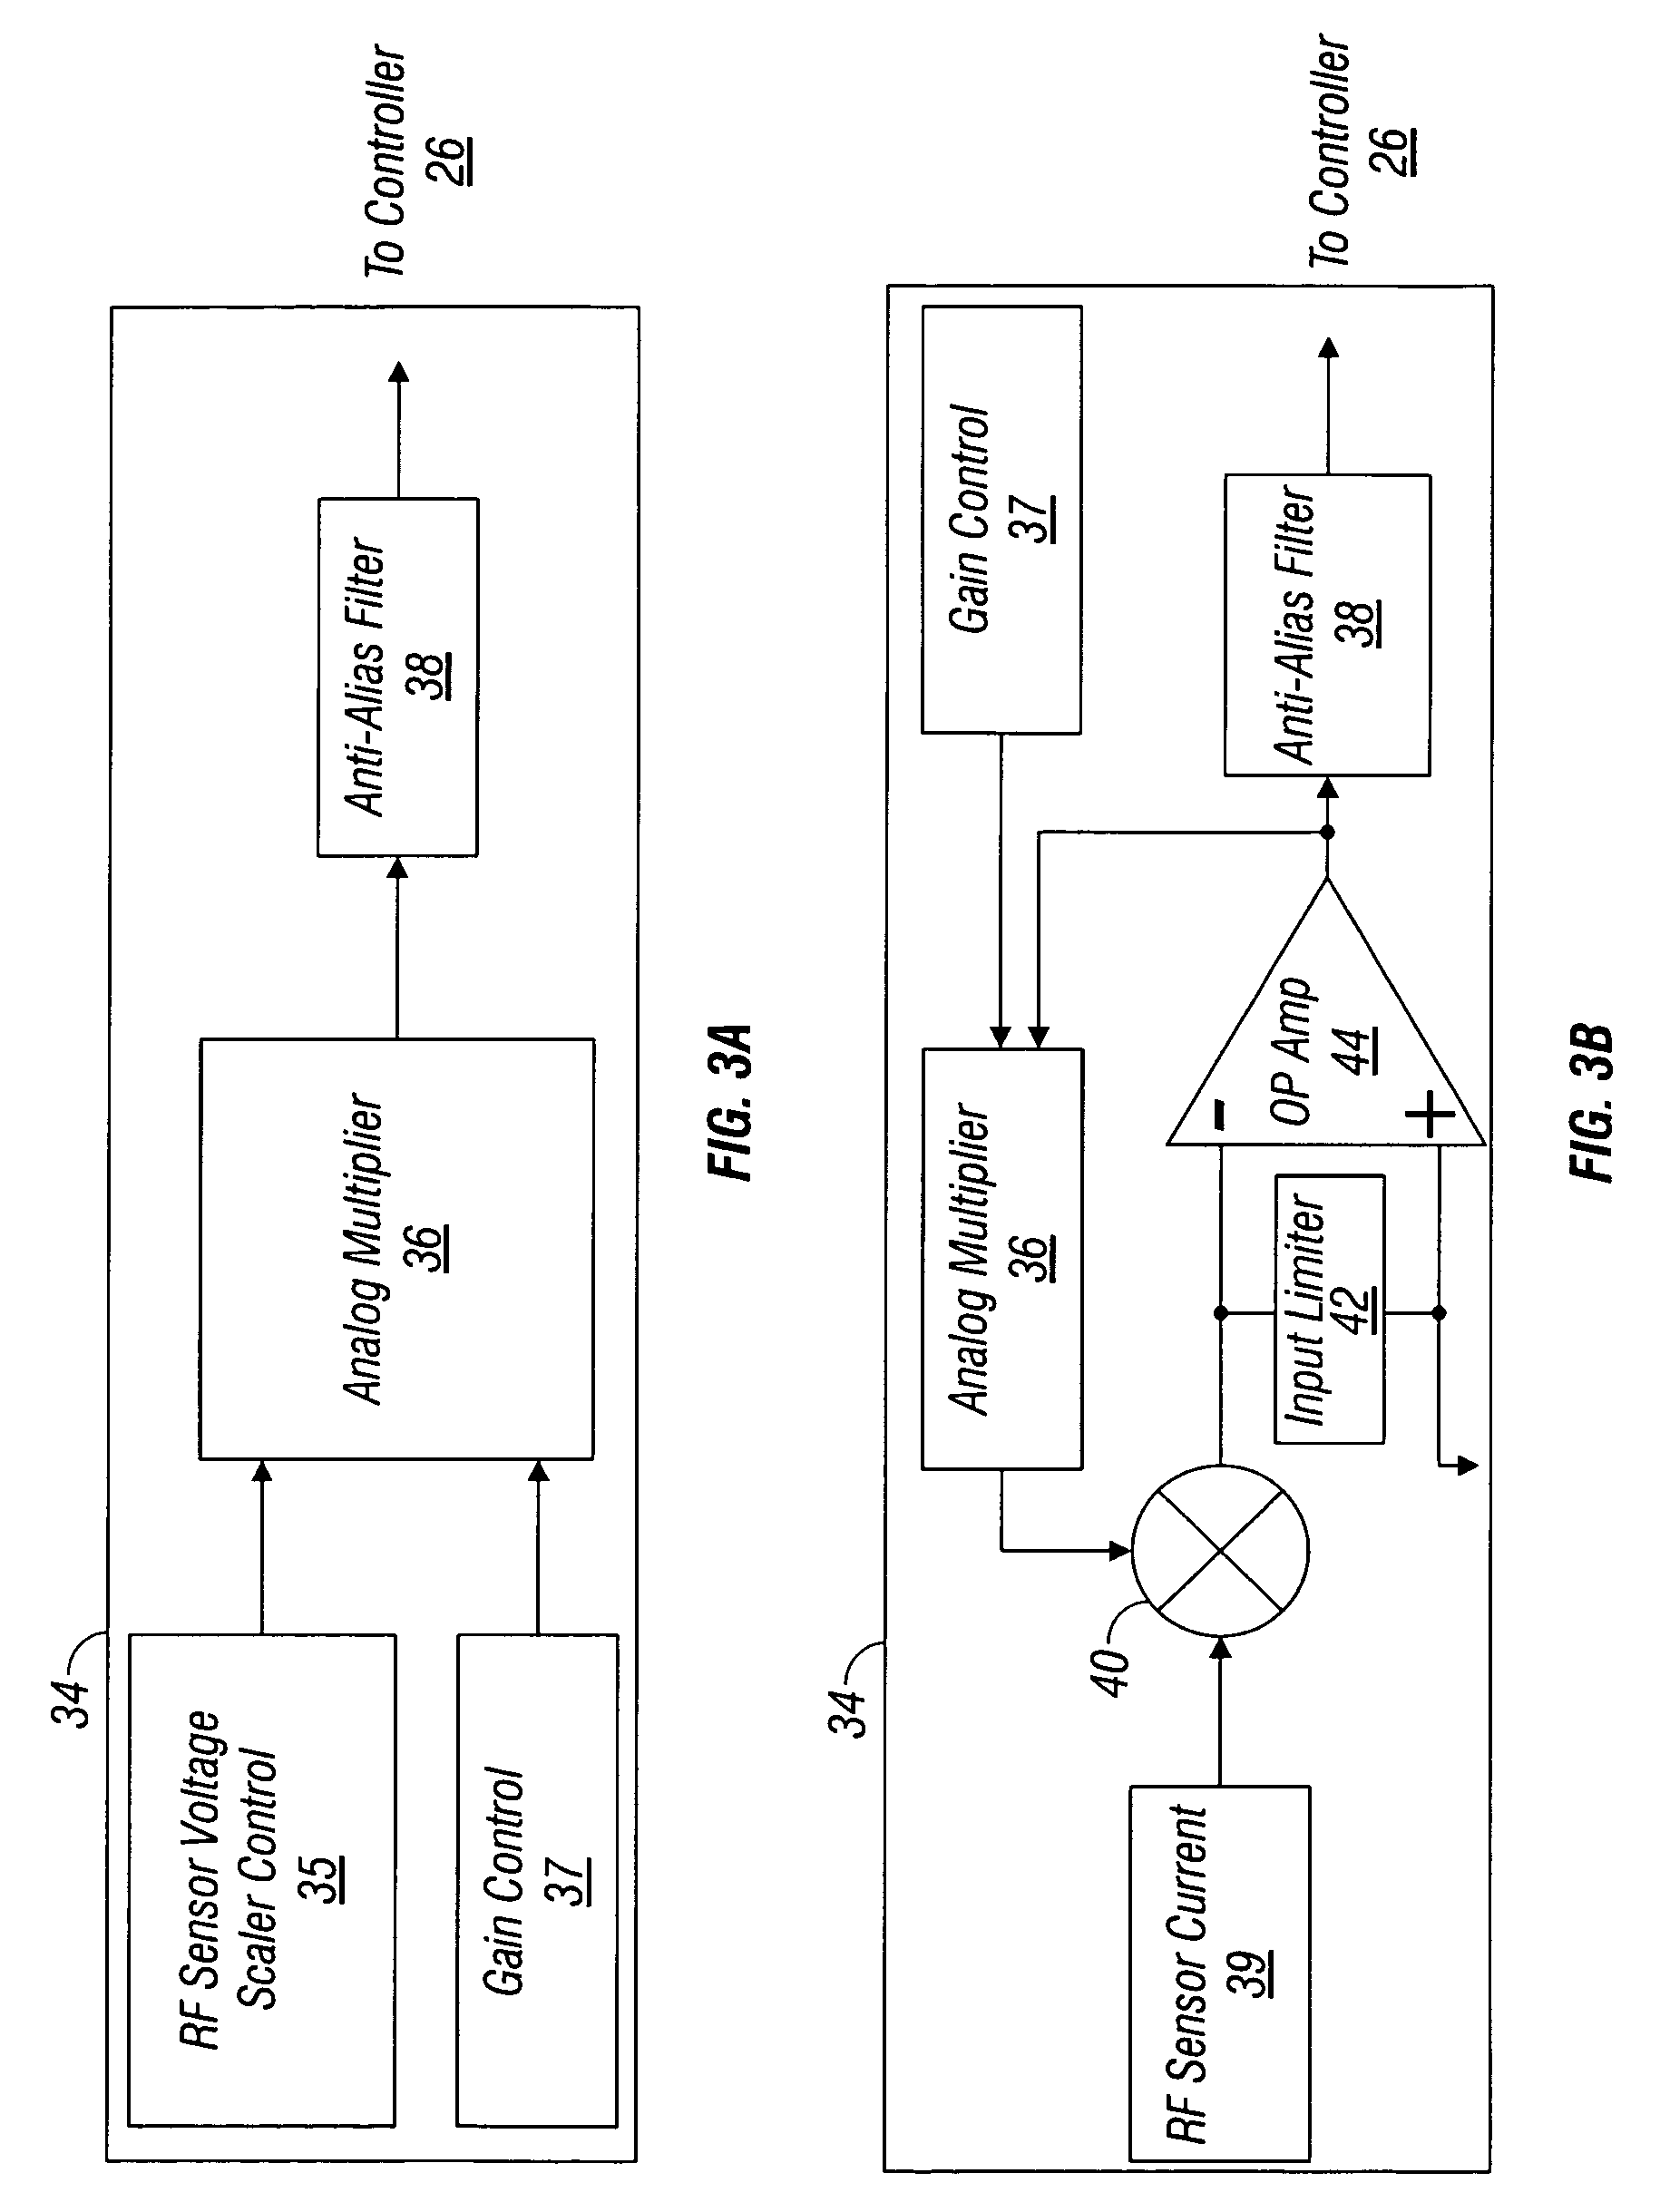 System and method for closed loop monitoring of monopolar electrosurgical apparatus